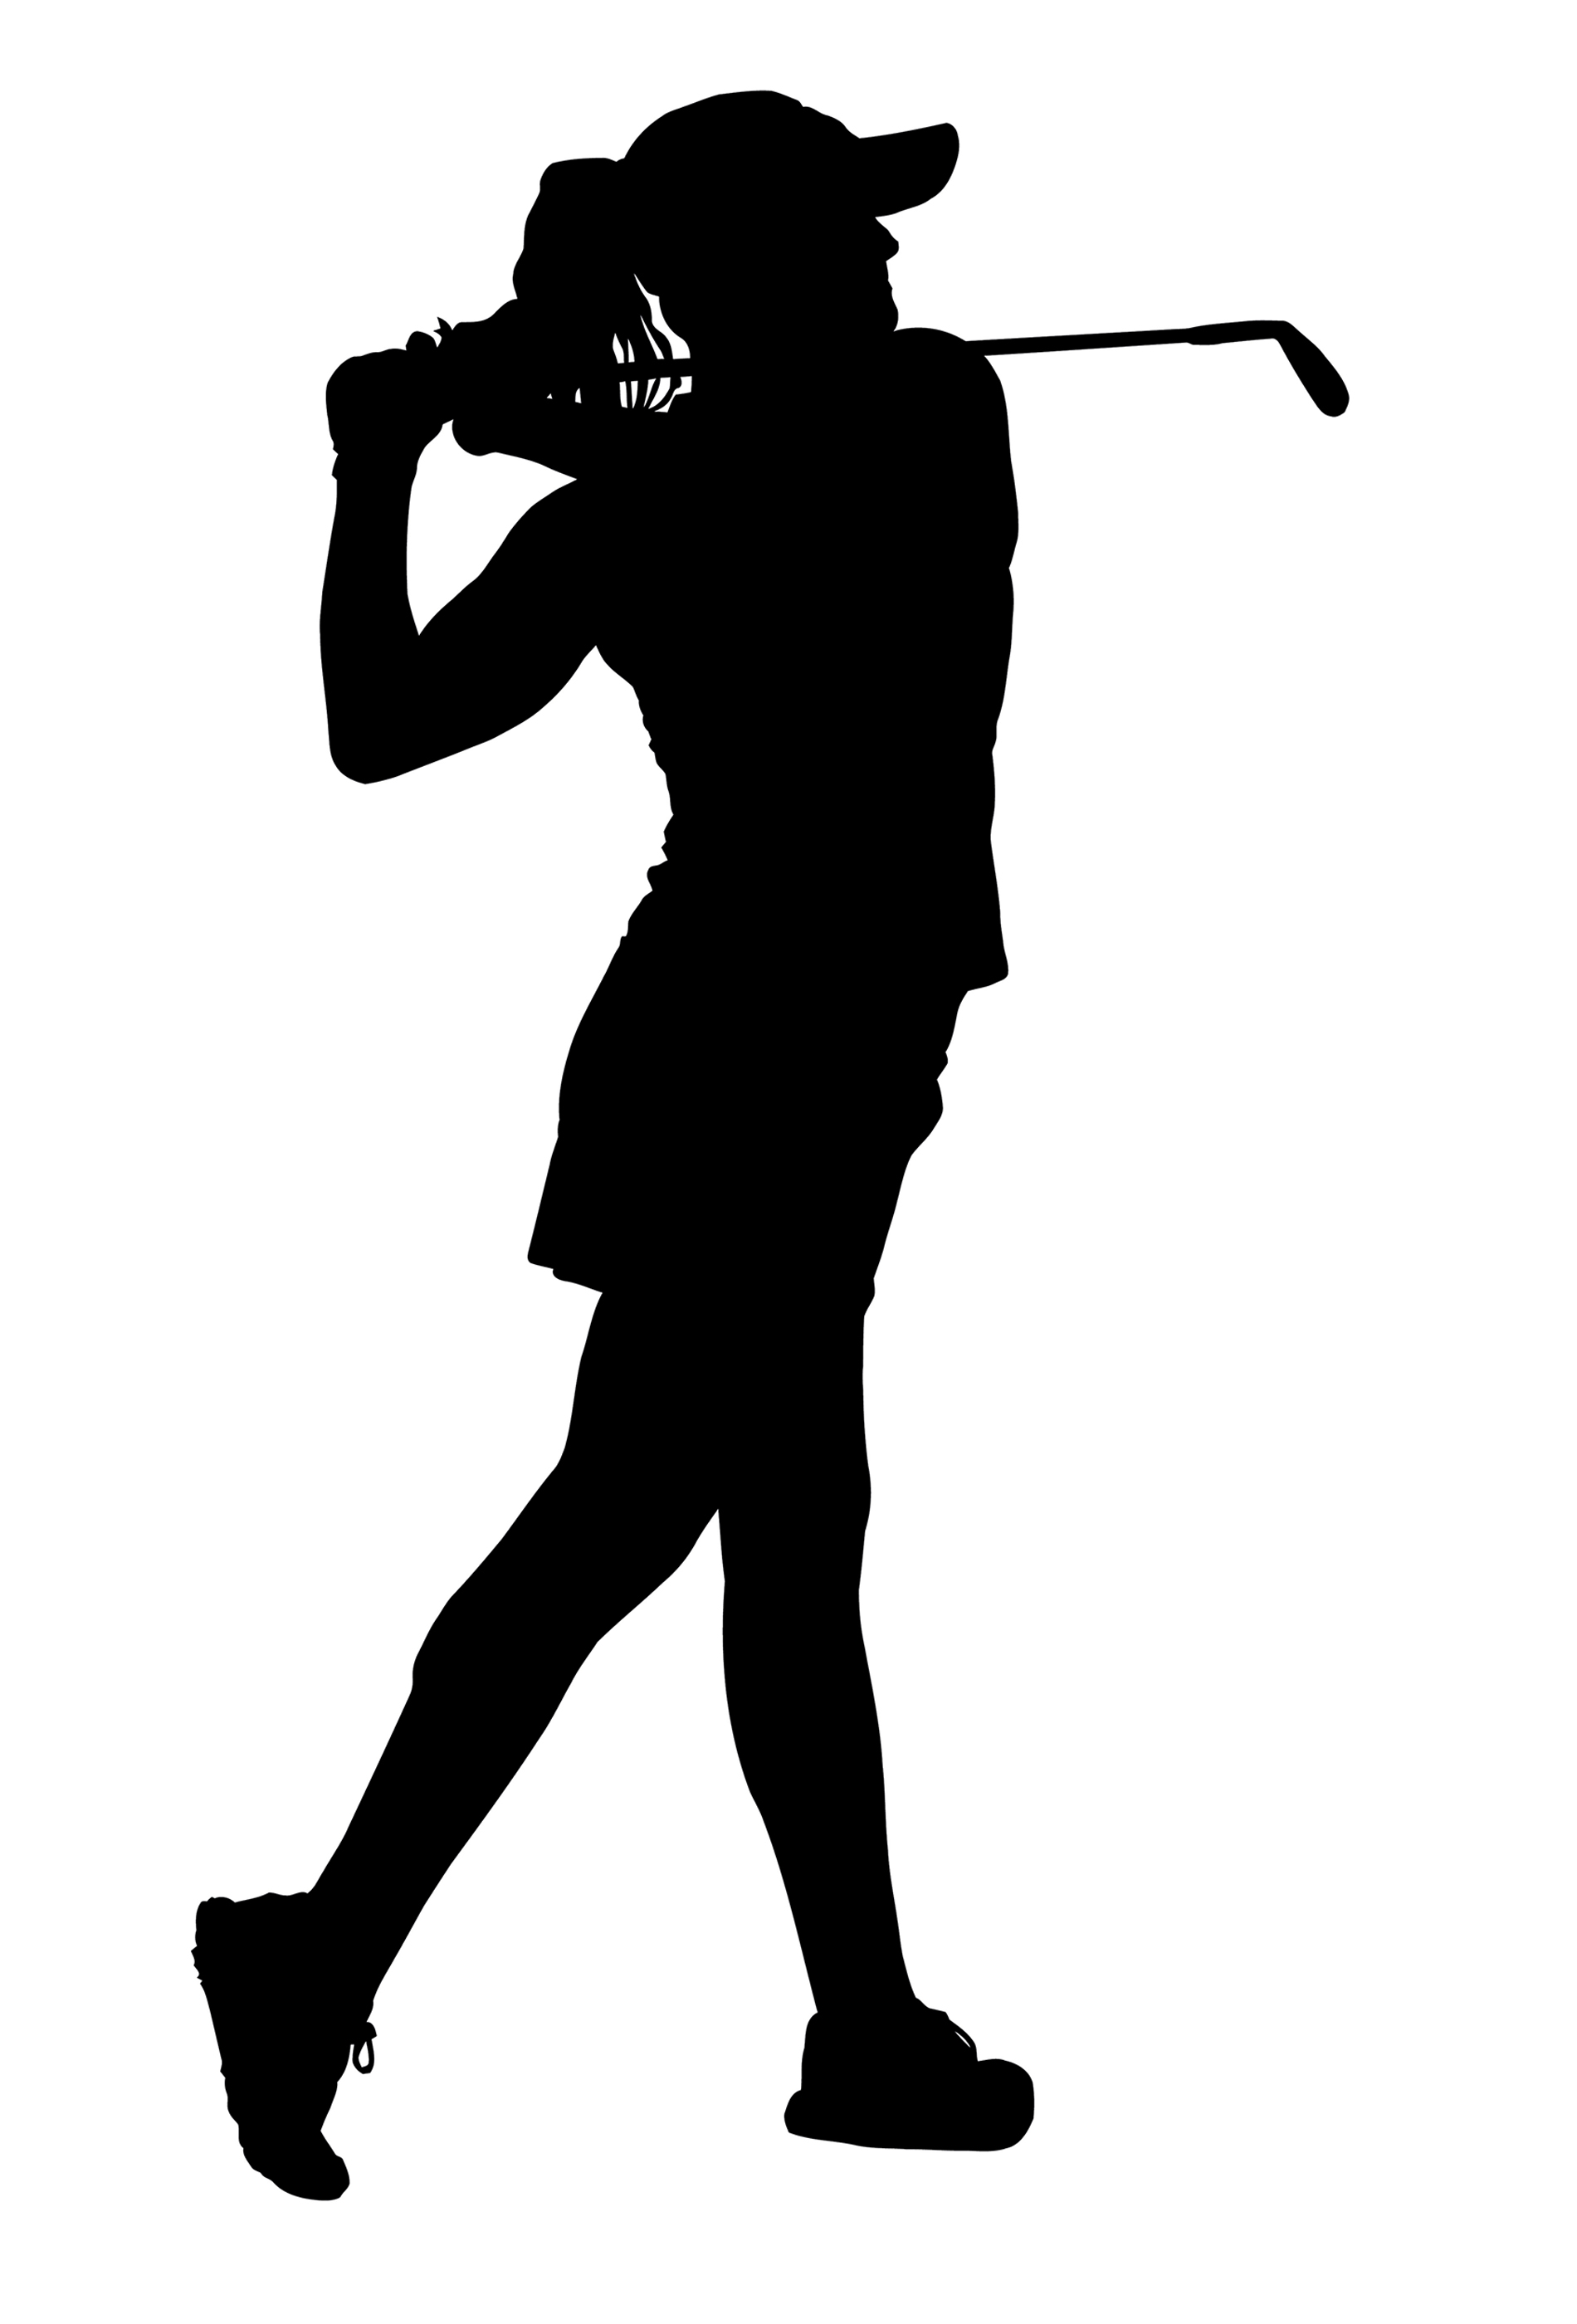 golf swing silhouette illustration of a more upright finish/follow-through that reduces force through the lumbar spine 